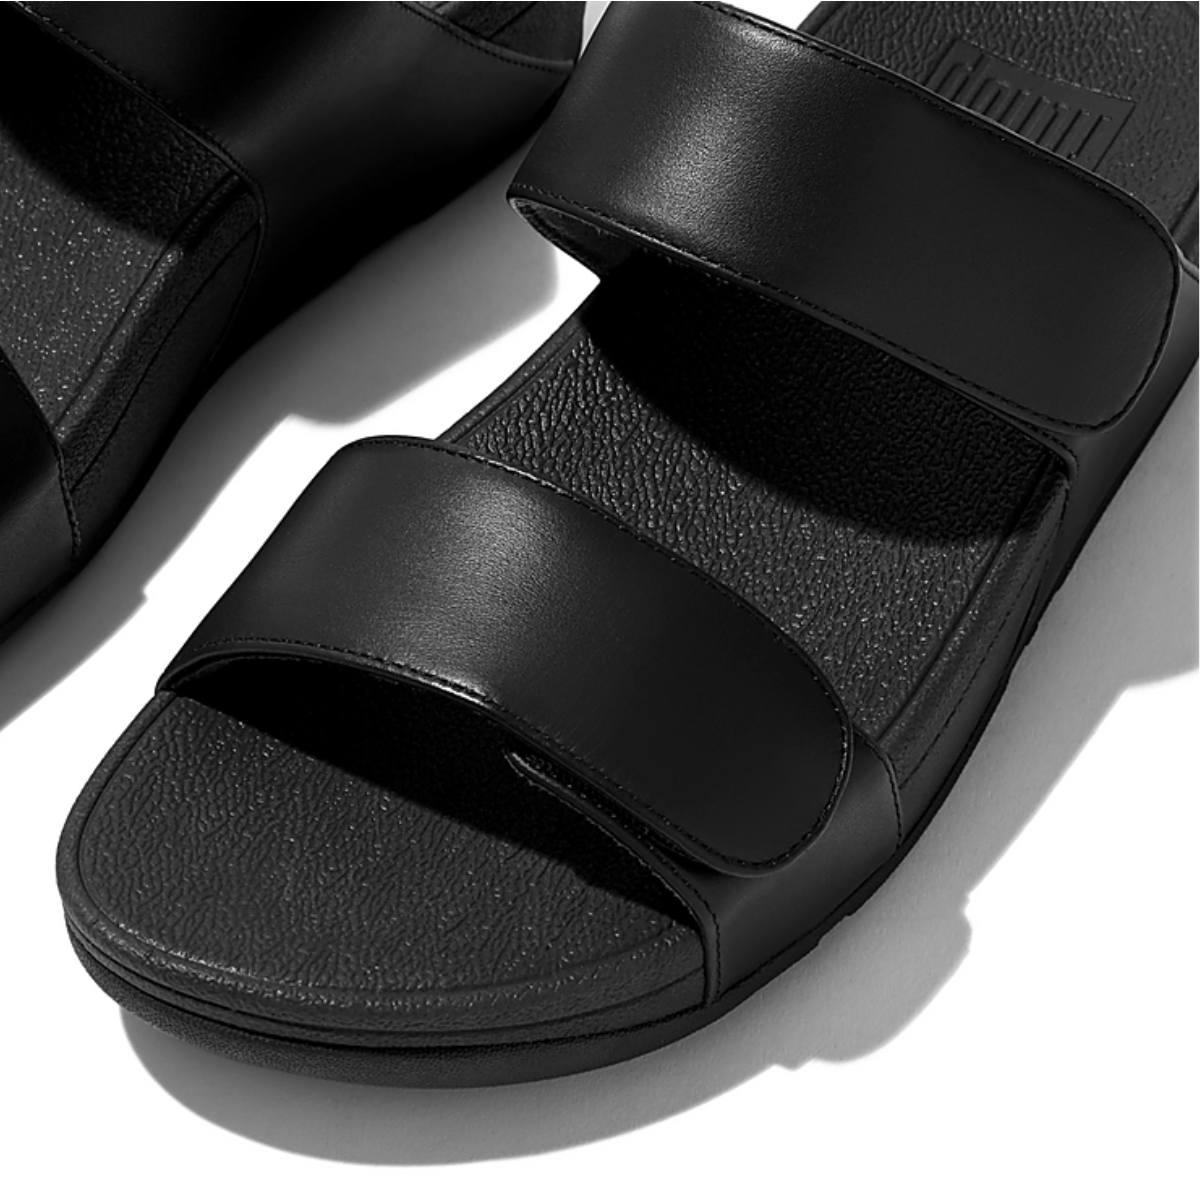 A pair of Lulu Adjustable Leather slide in Black sandals from Flipflops & Whatnots providing exceptional comfort, resting on a pristine white surface.